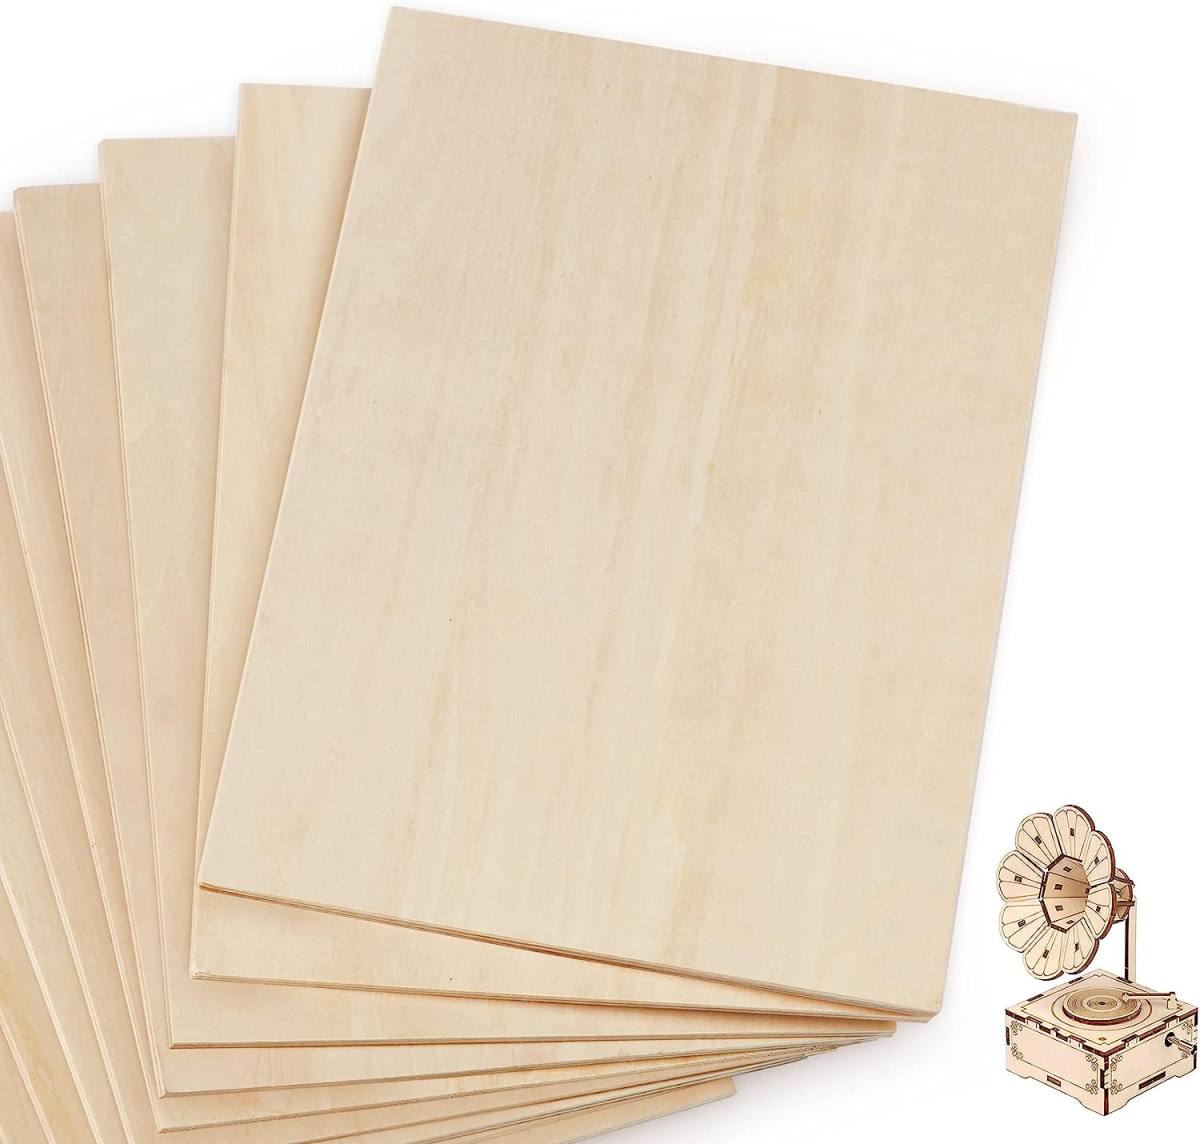  Basswood Sheets 1/16, Craft Wood 10 Pack - 12 X 12 X 1/16  Inch - Cricut Wood Sheets 1.5mm, Plywood Sheets